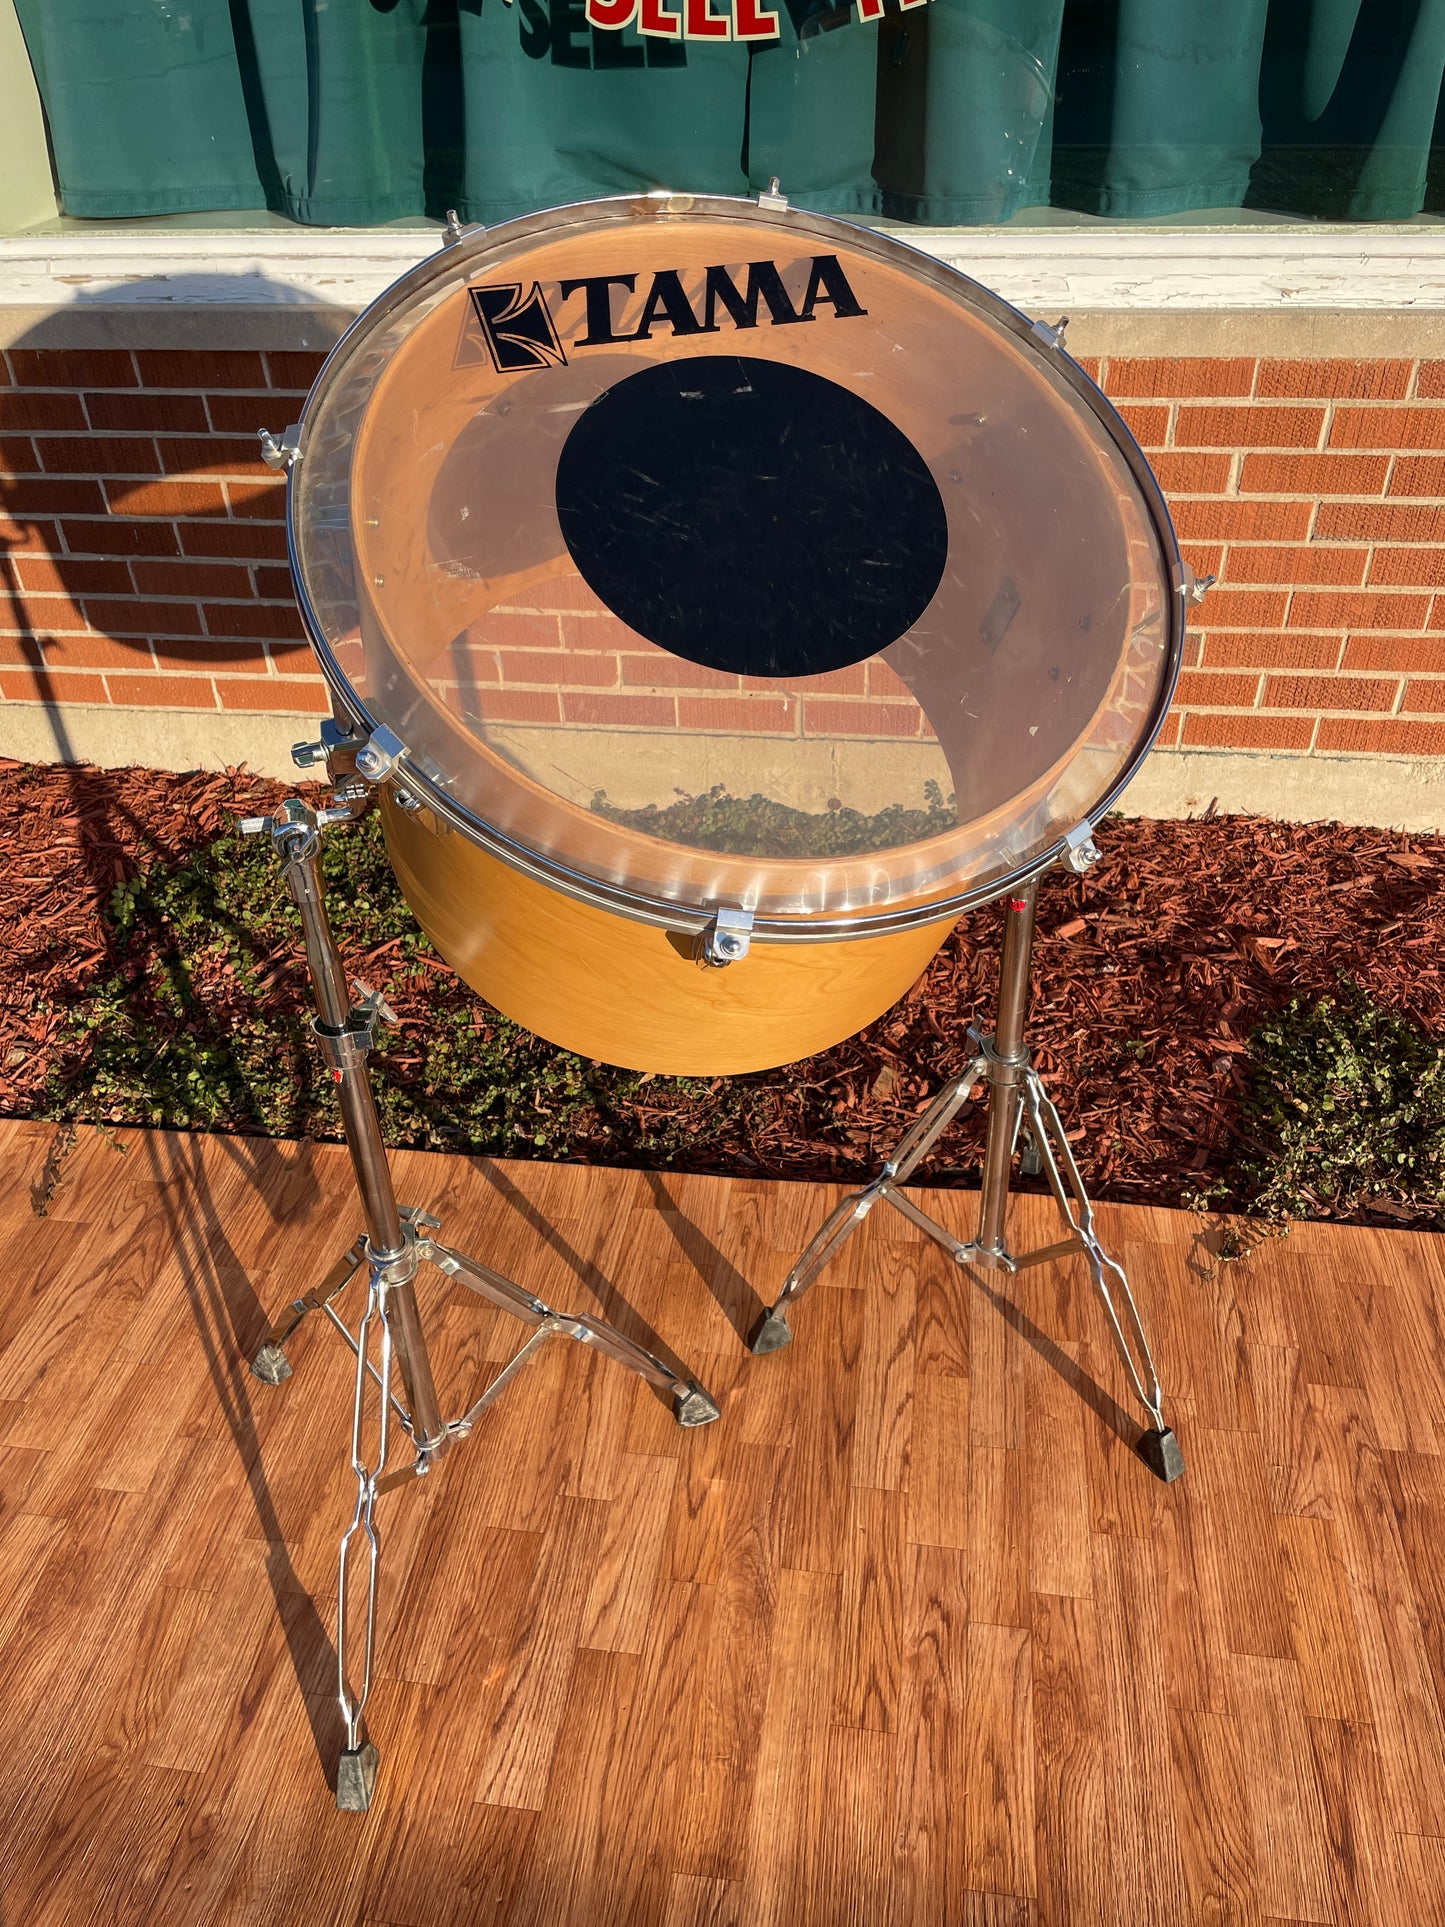 1980s Tama 20" Superstar Model 9850S Suspended Gong Bass Drum Super Maple Natural w/ Single Arm Stands - Billy Cobham